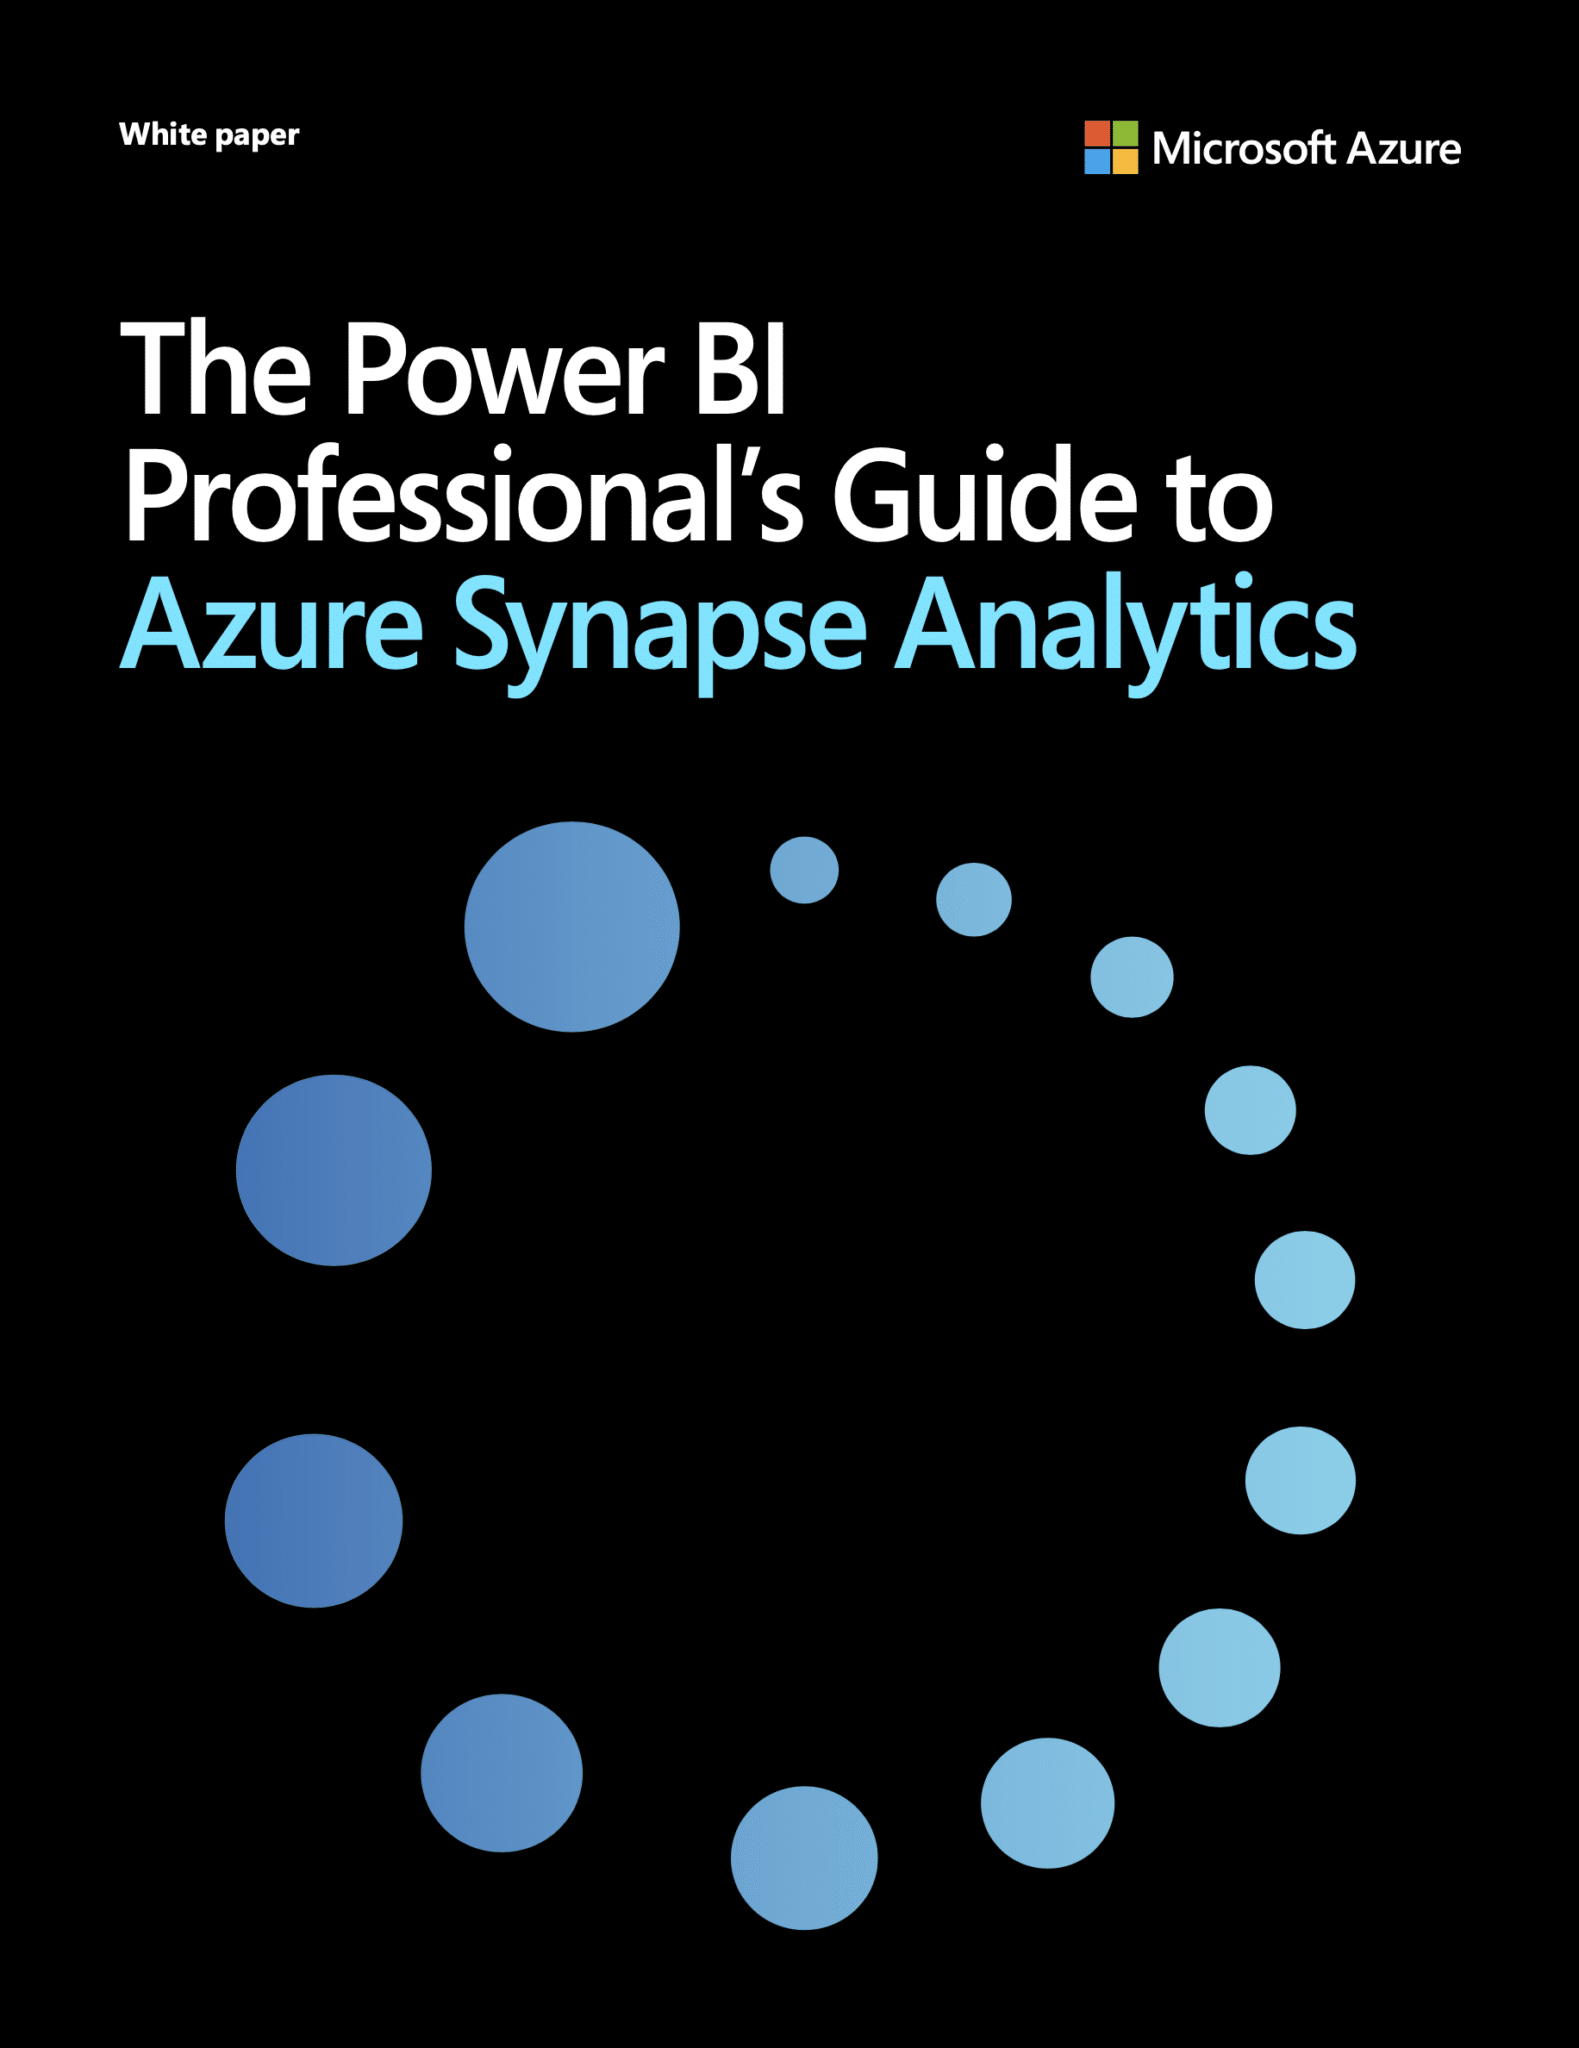 The Power BI Professional’s Guide to Azure Synapse Analytics 3